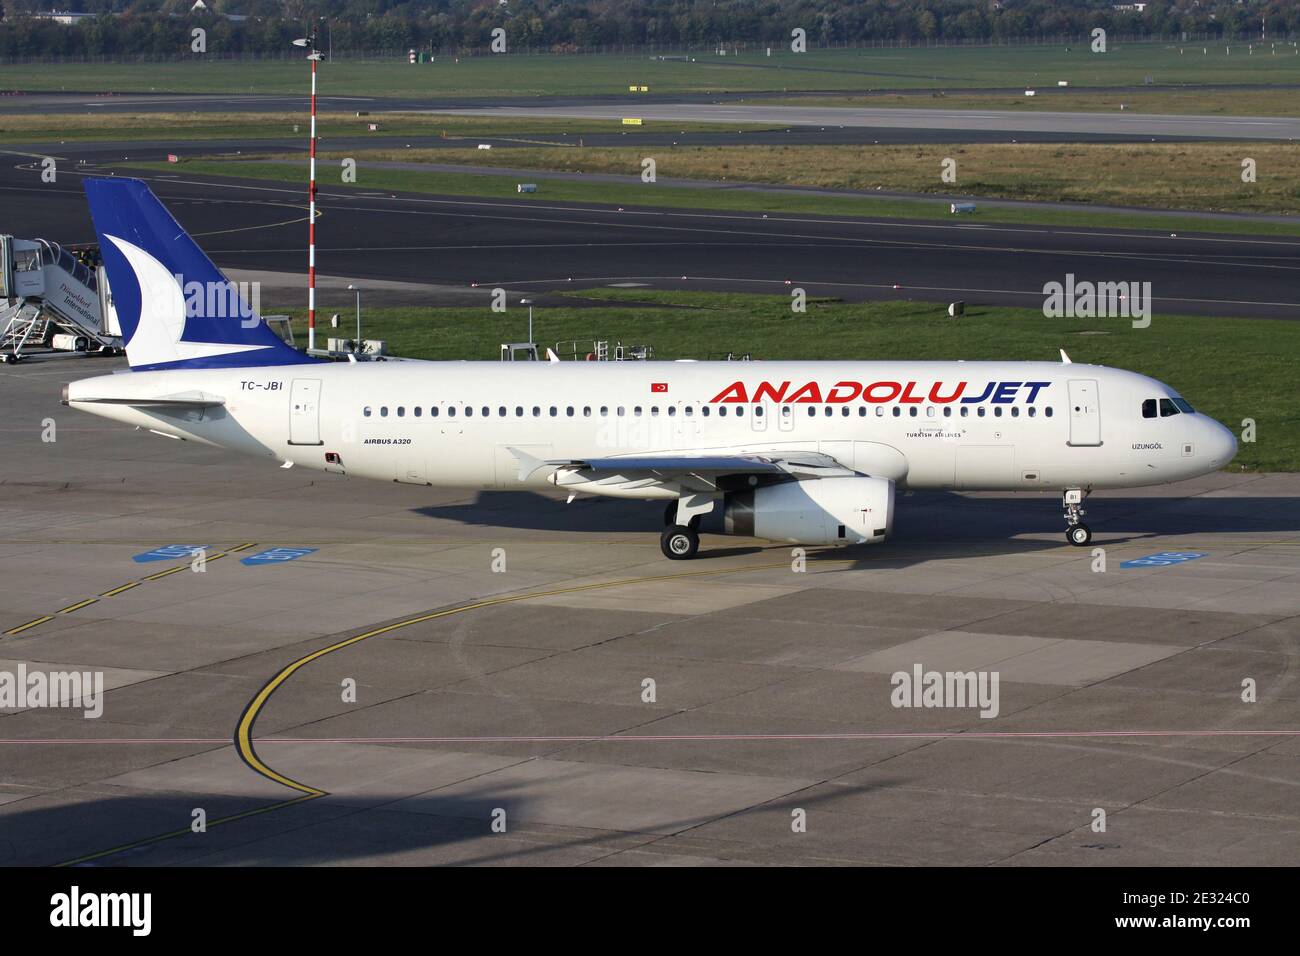 Turkish Anadolu Jet Airbus A320-200 with registration TC-JBI on taxiway at Dusseldorf Airport. Stock Photo